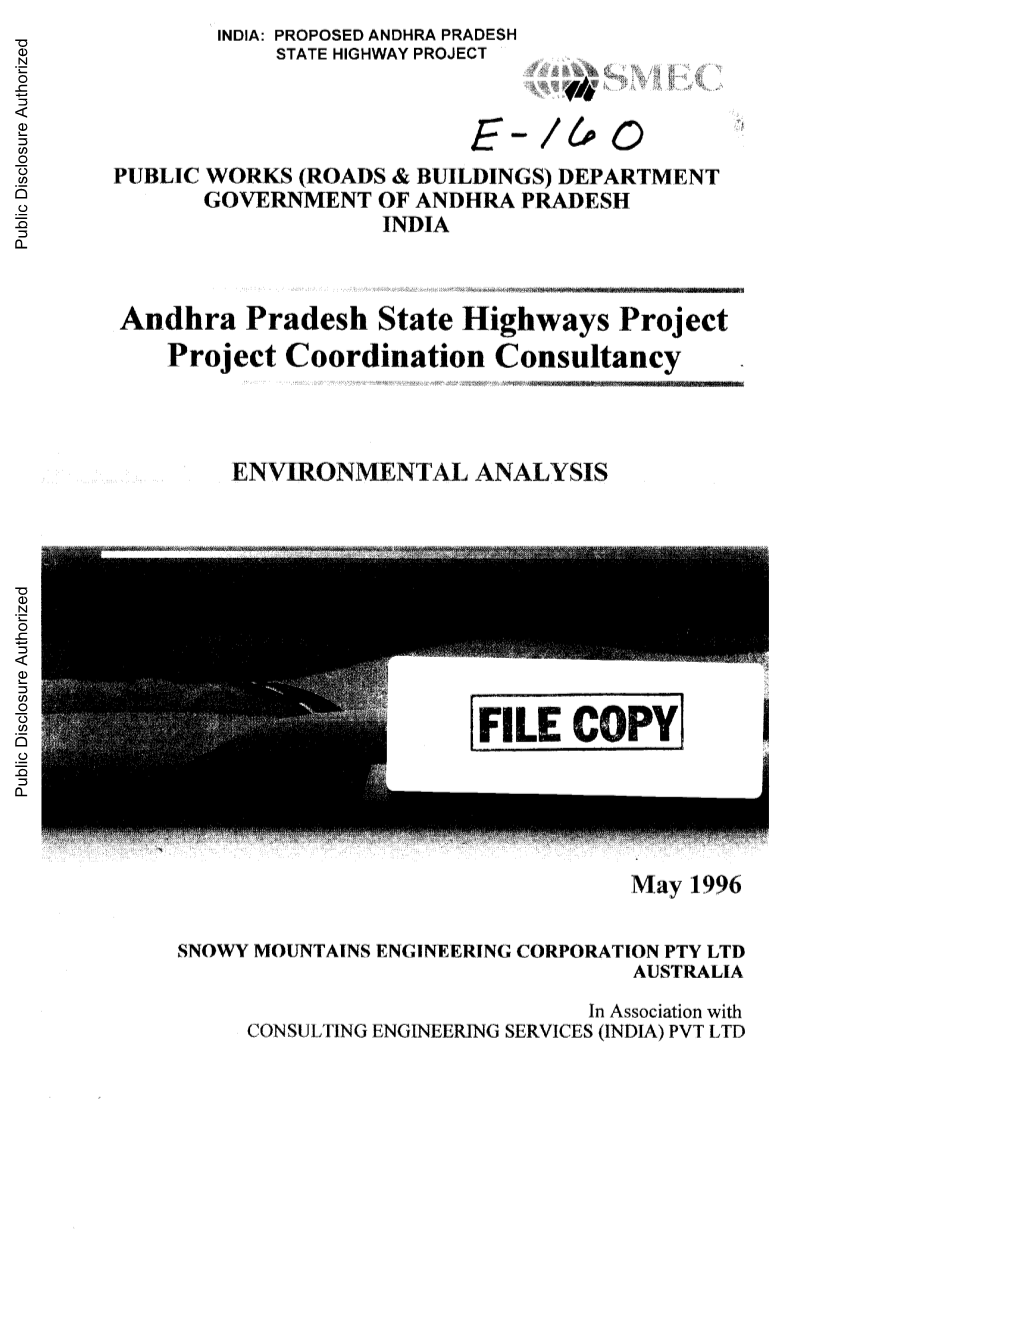 Andhra Pradesh State Highway Project